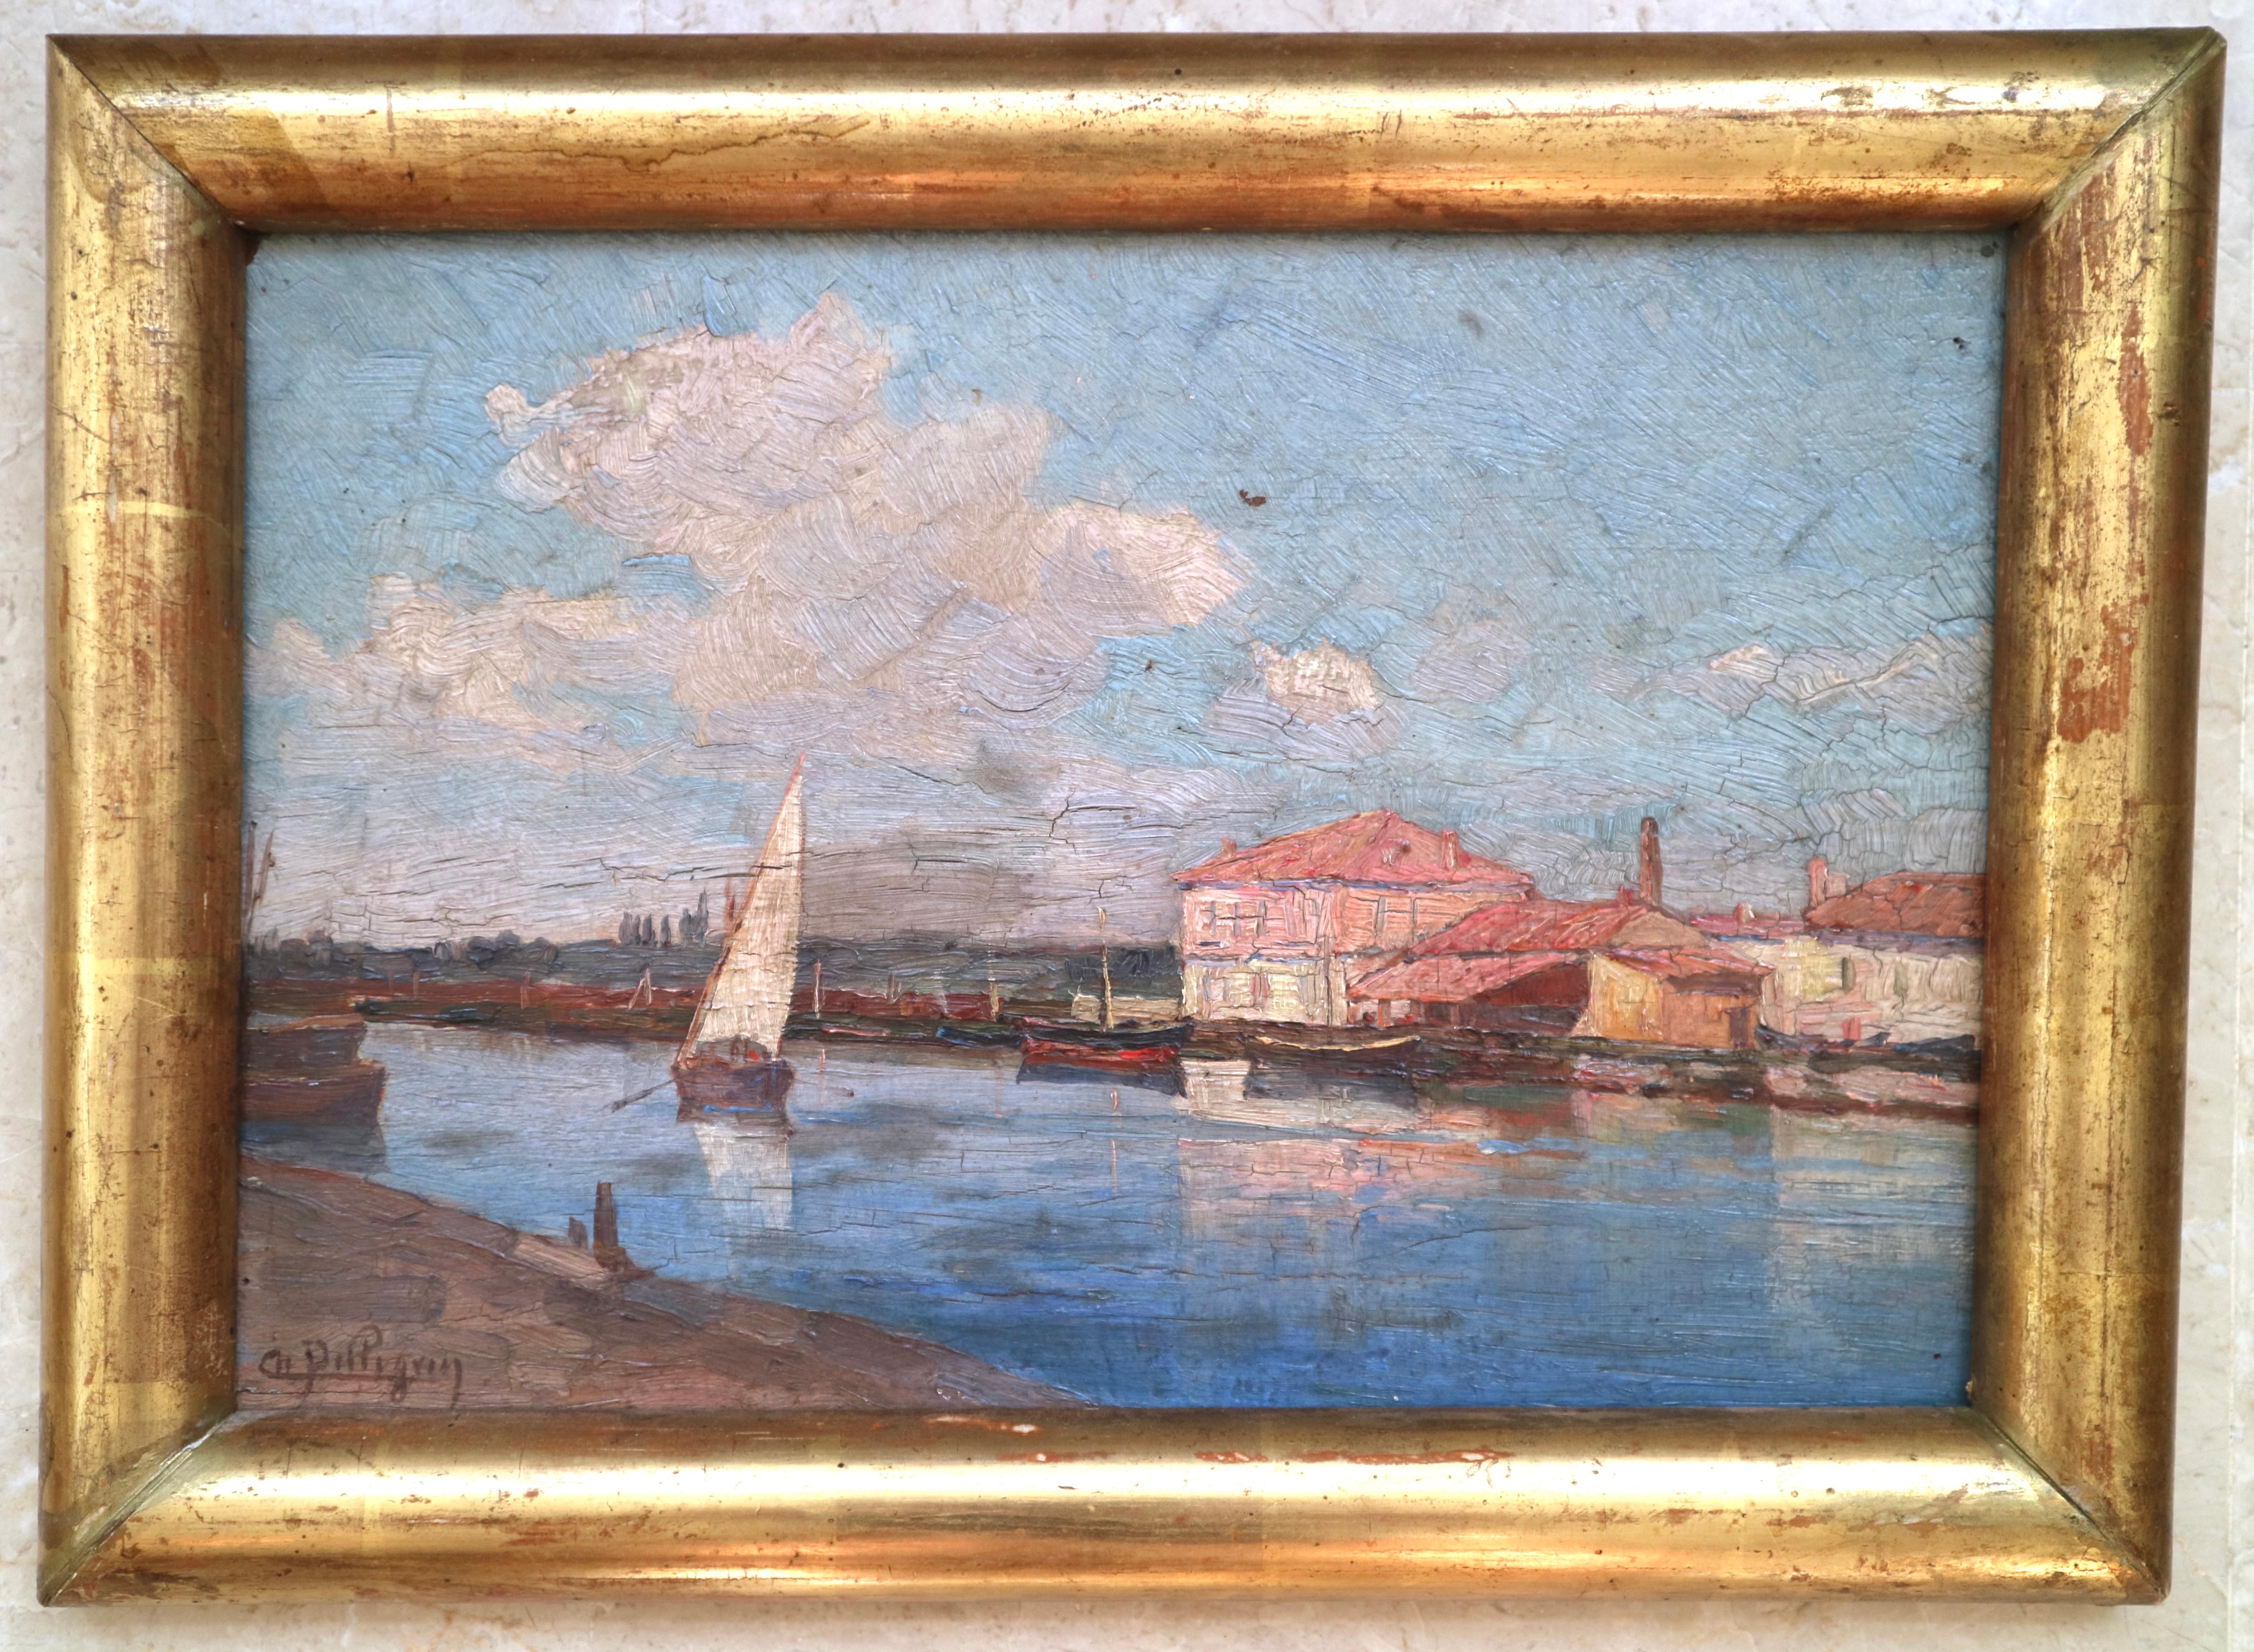 French impressionist school, Marina with boat - Painting by Unknown